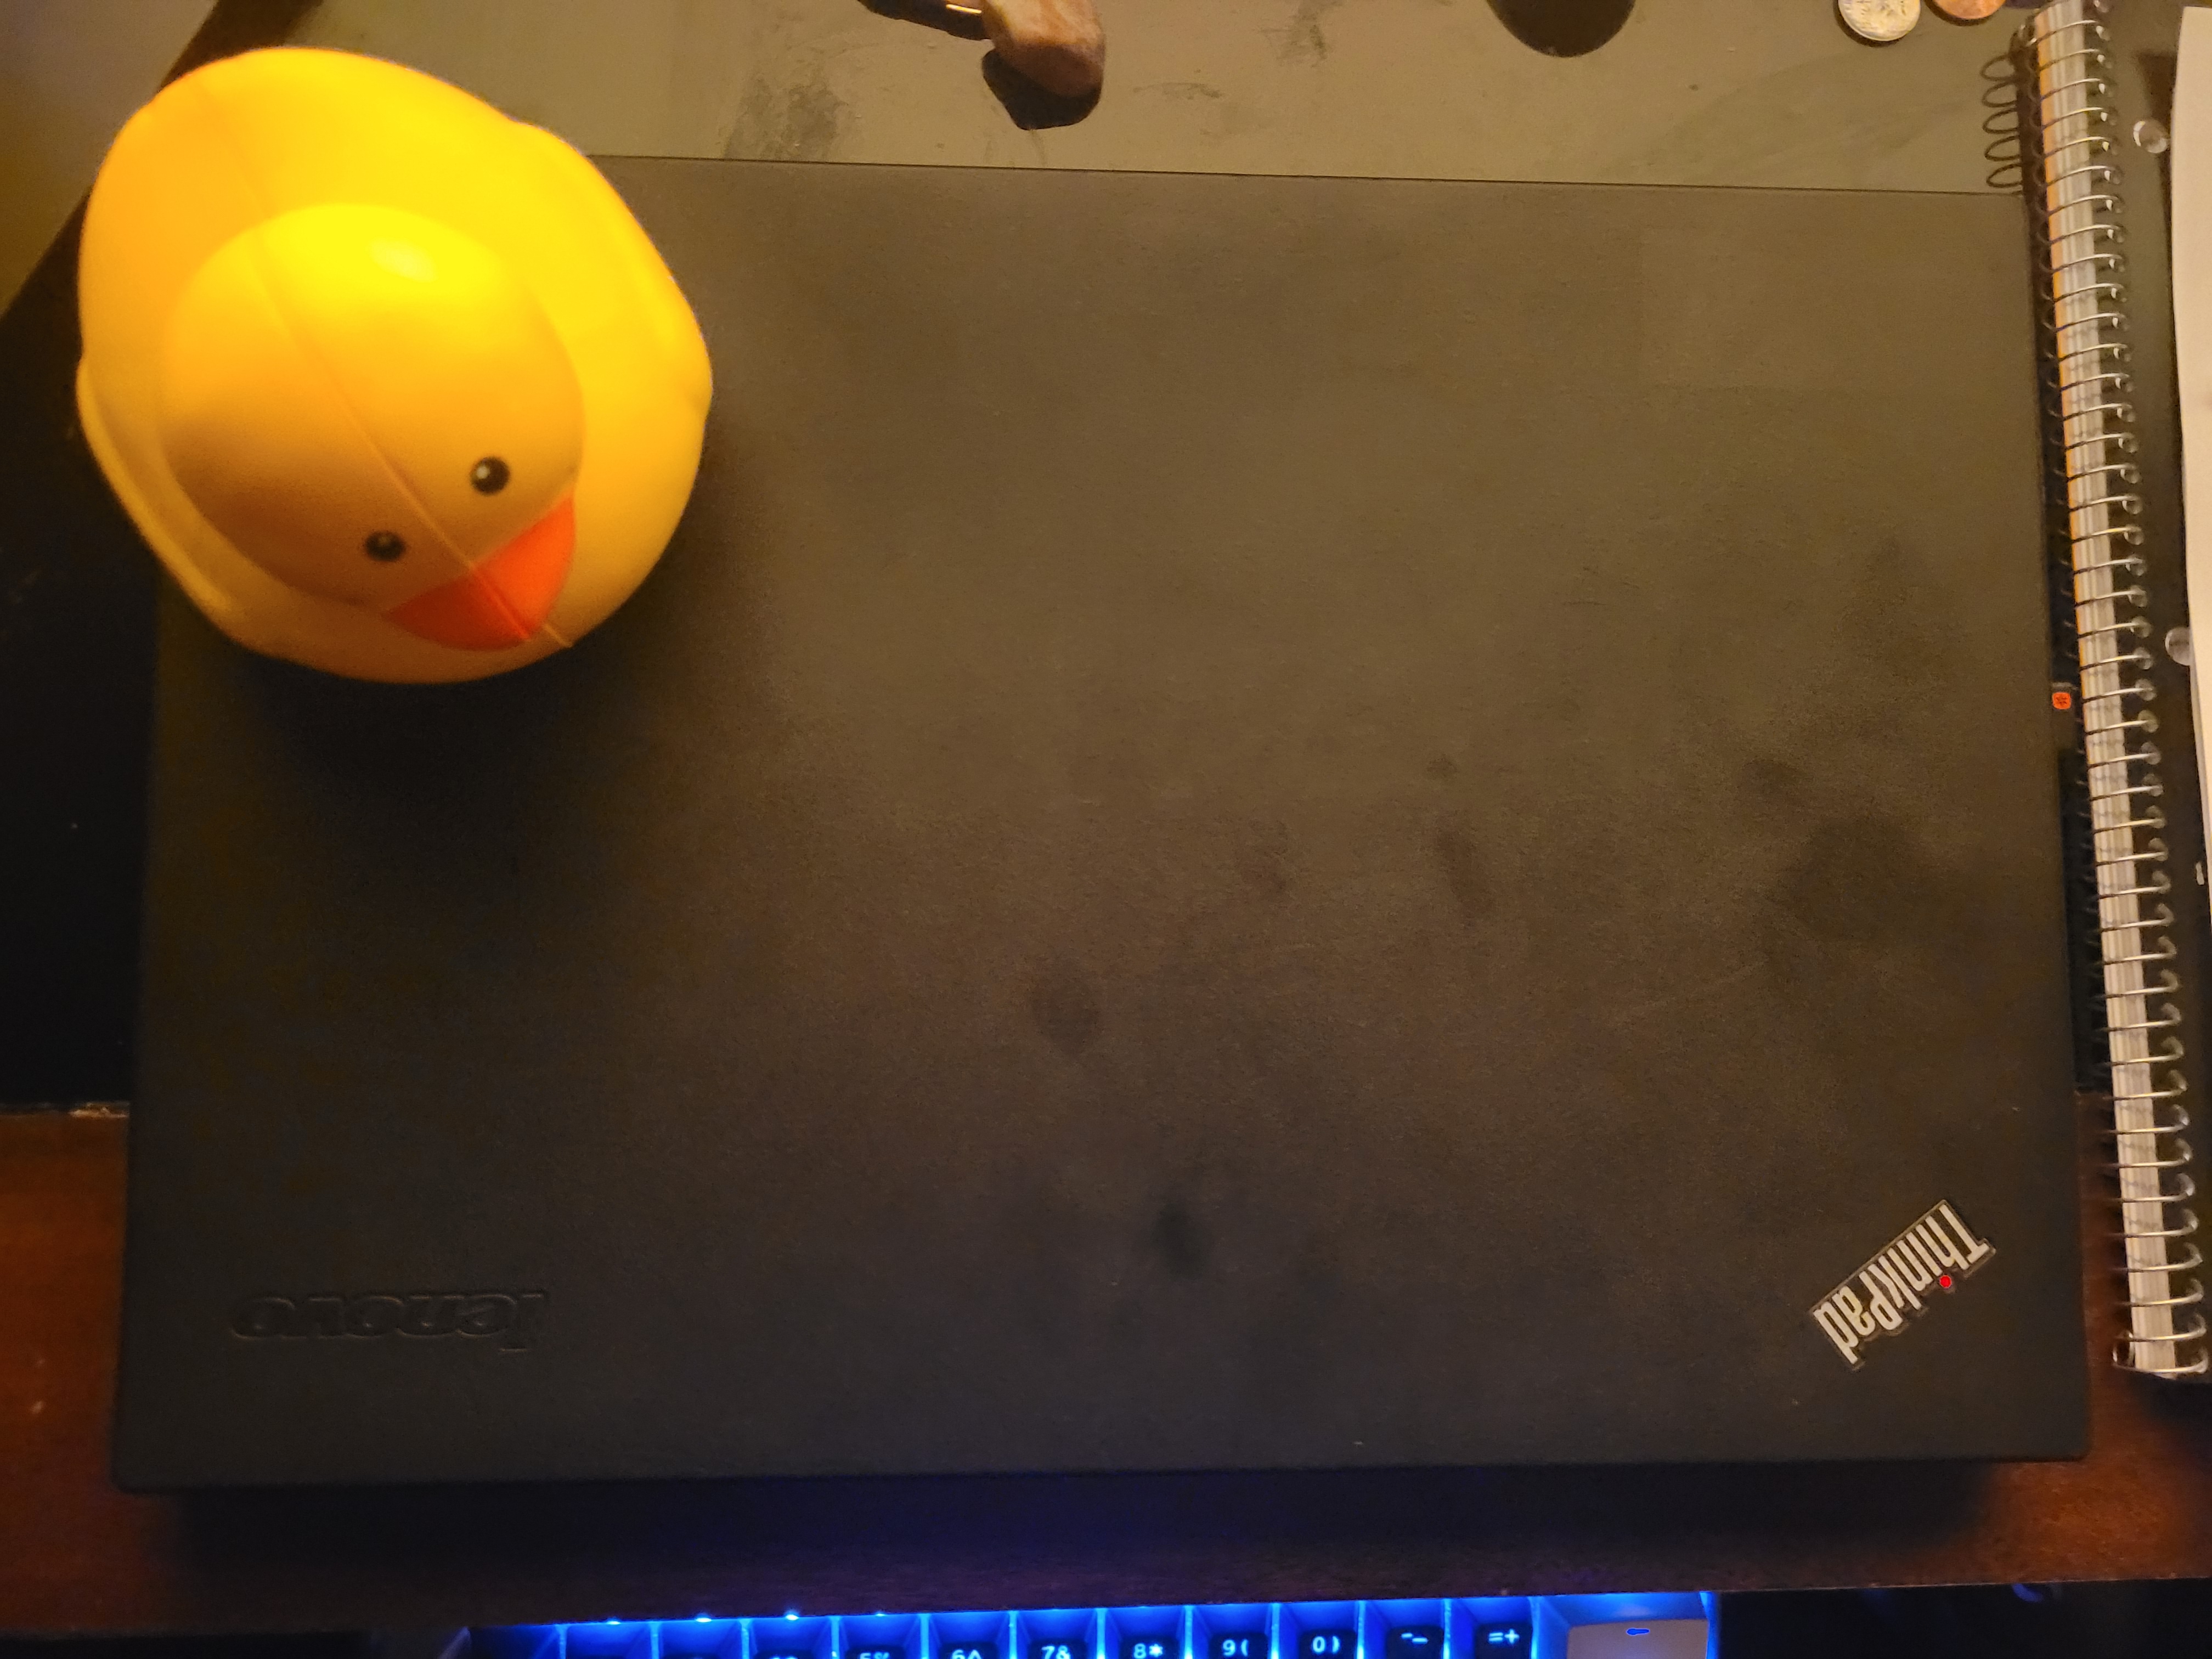 pic of my thinkpad with a rubber ducky on it :)